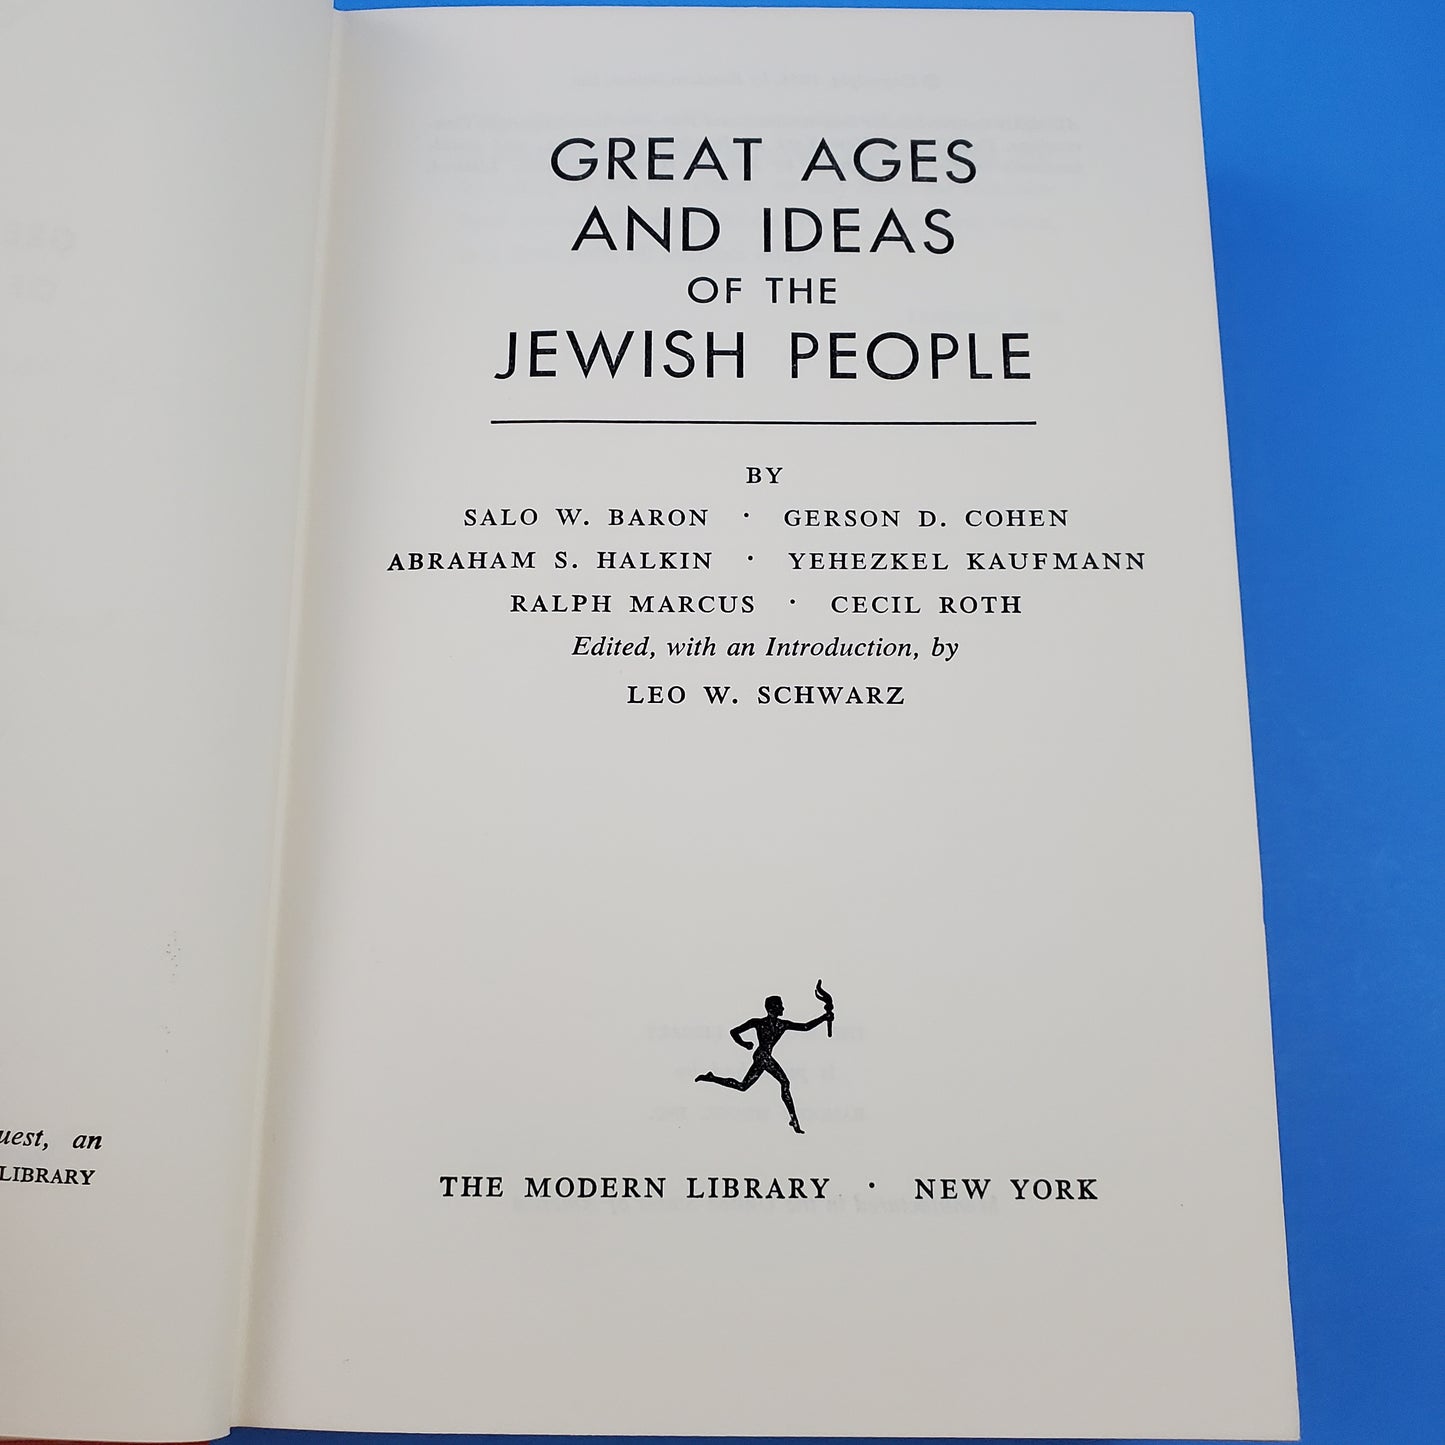 Great Ages and Ideas of the Jewish People